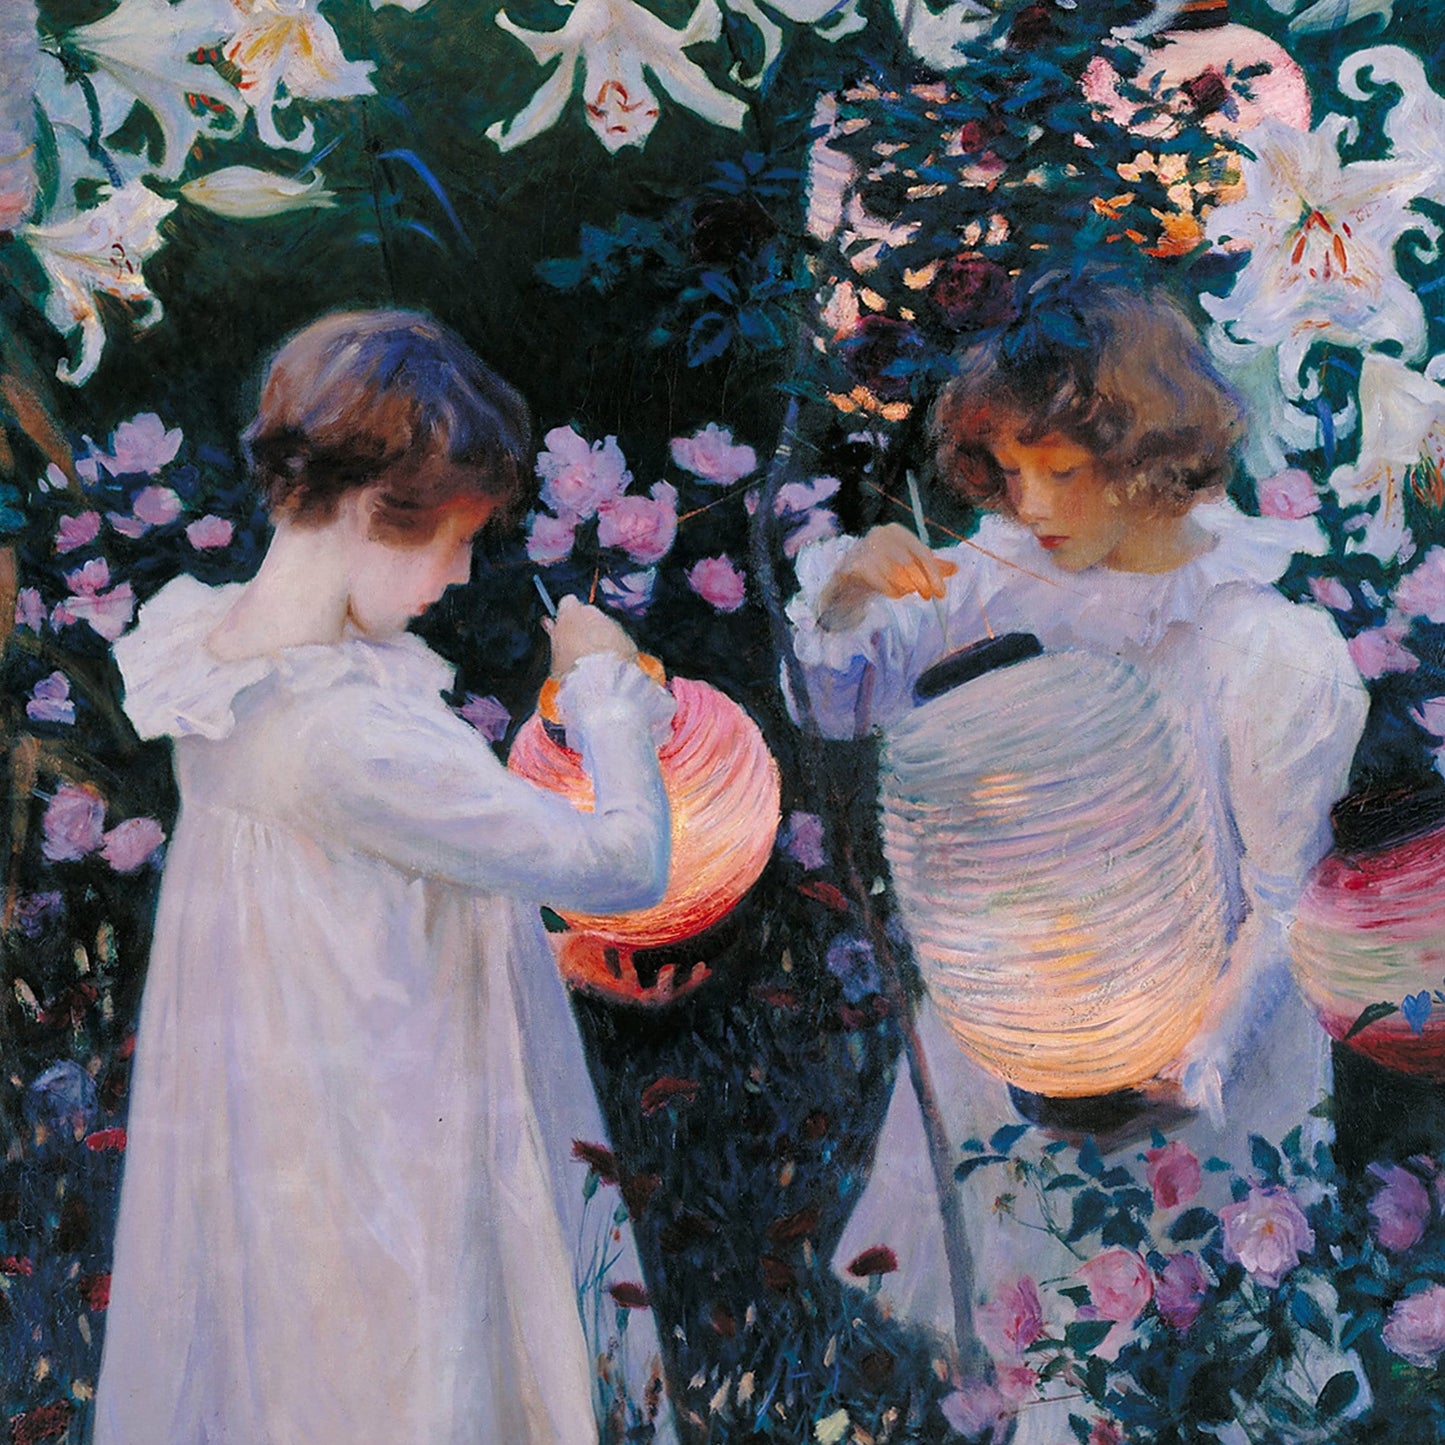 Carnation, Lily, Lily, Rose by John Singer Sargent, 3d Printed with texture and brush strokes looks like original oil-painting, code:193